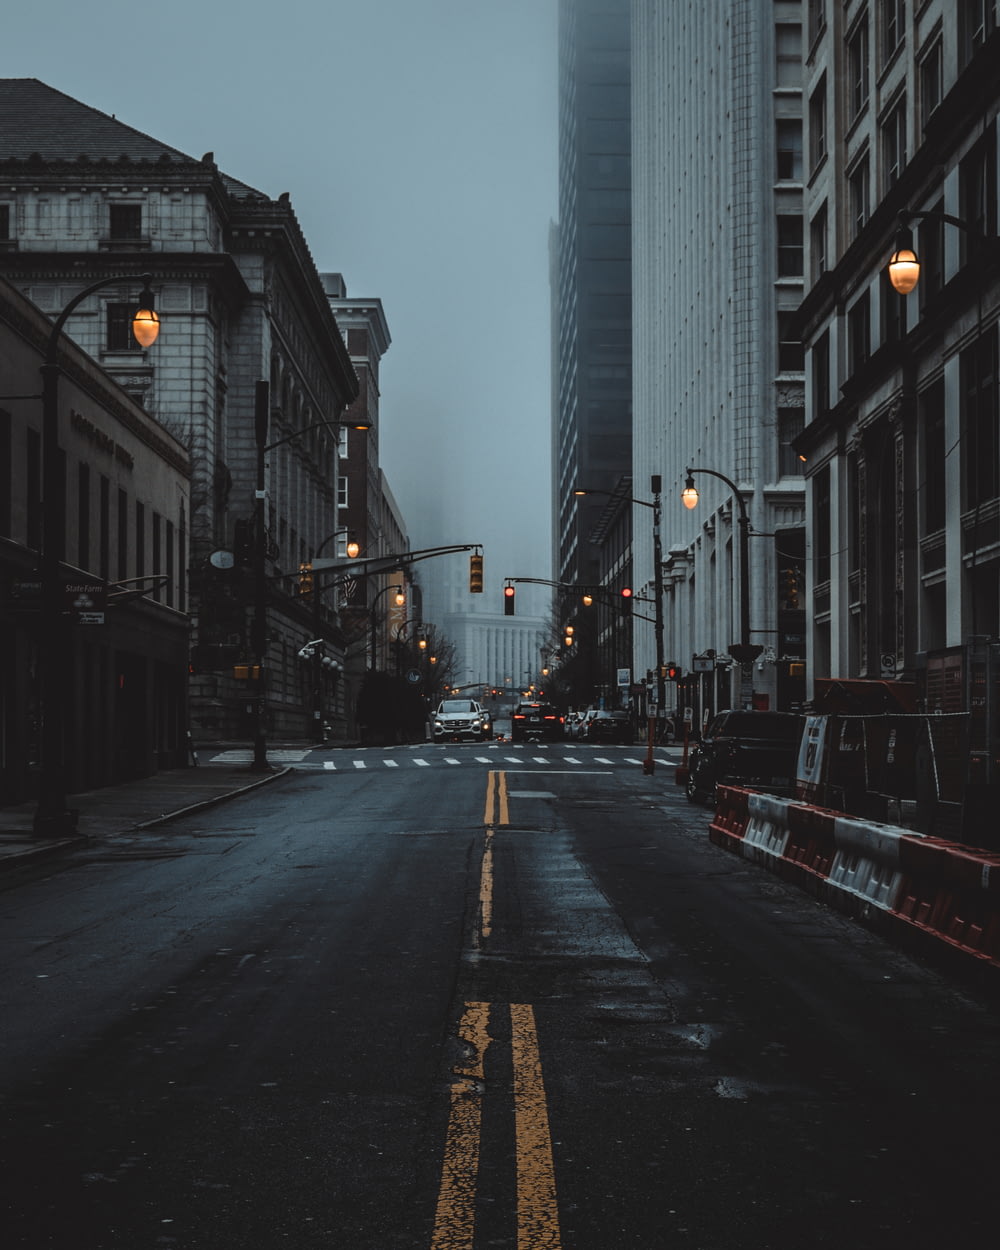 an empty city street at night with a traffic light